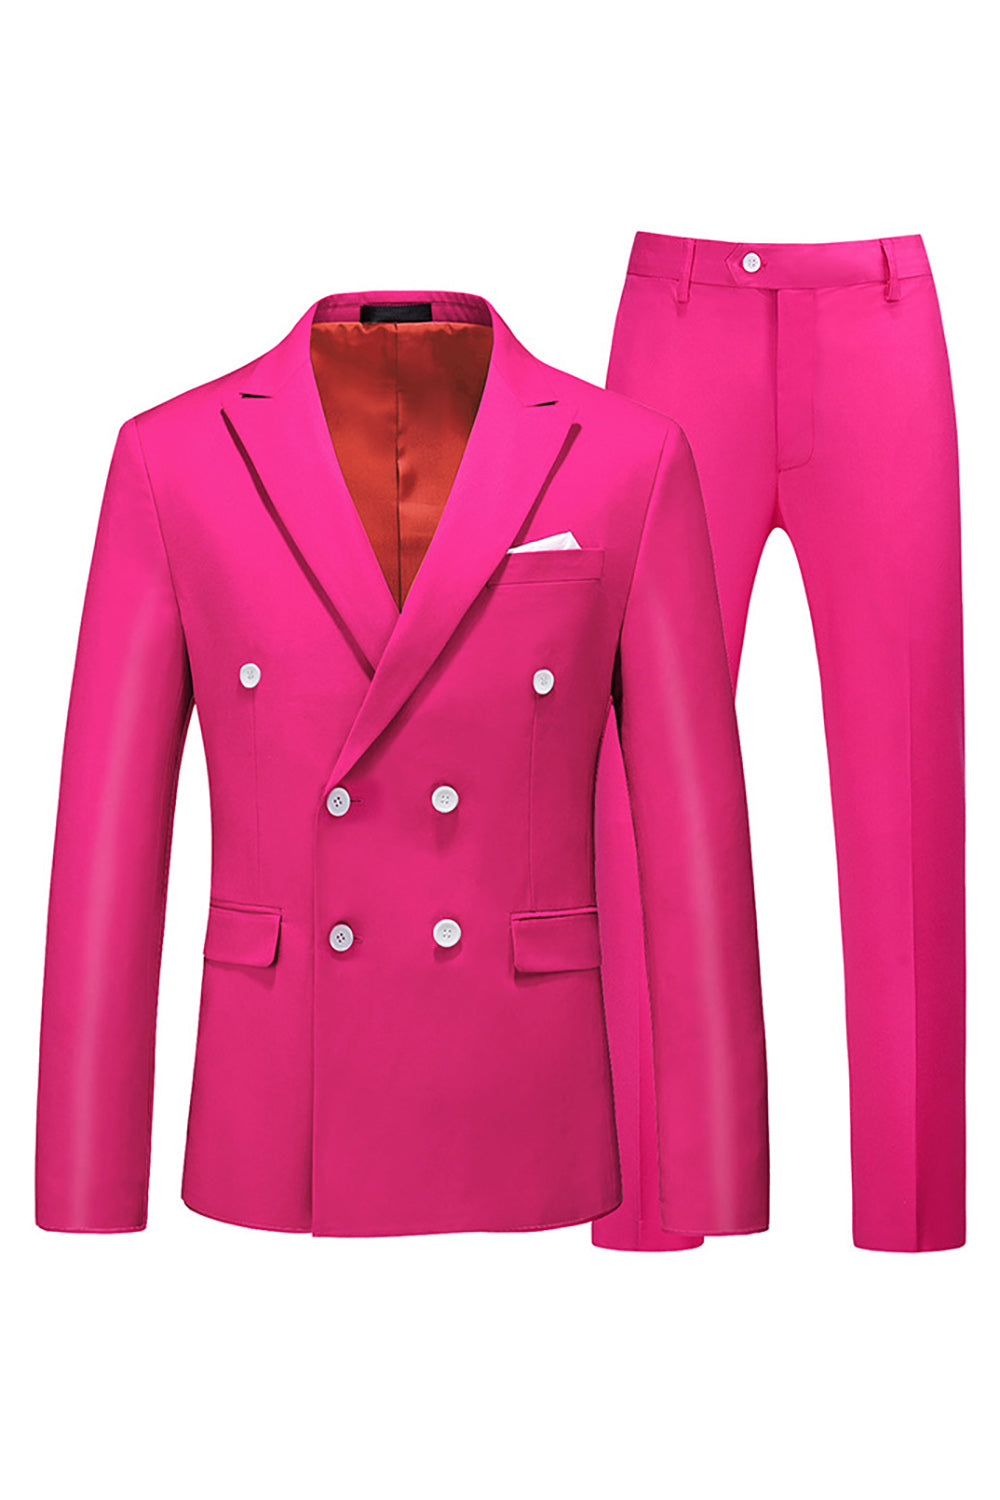 Hot Pink Double Breasted 2 Piece Prom Men Suits